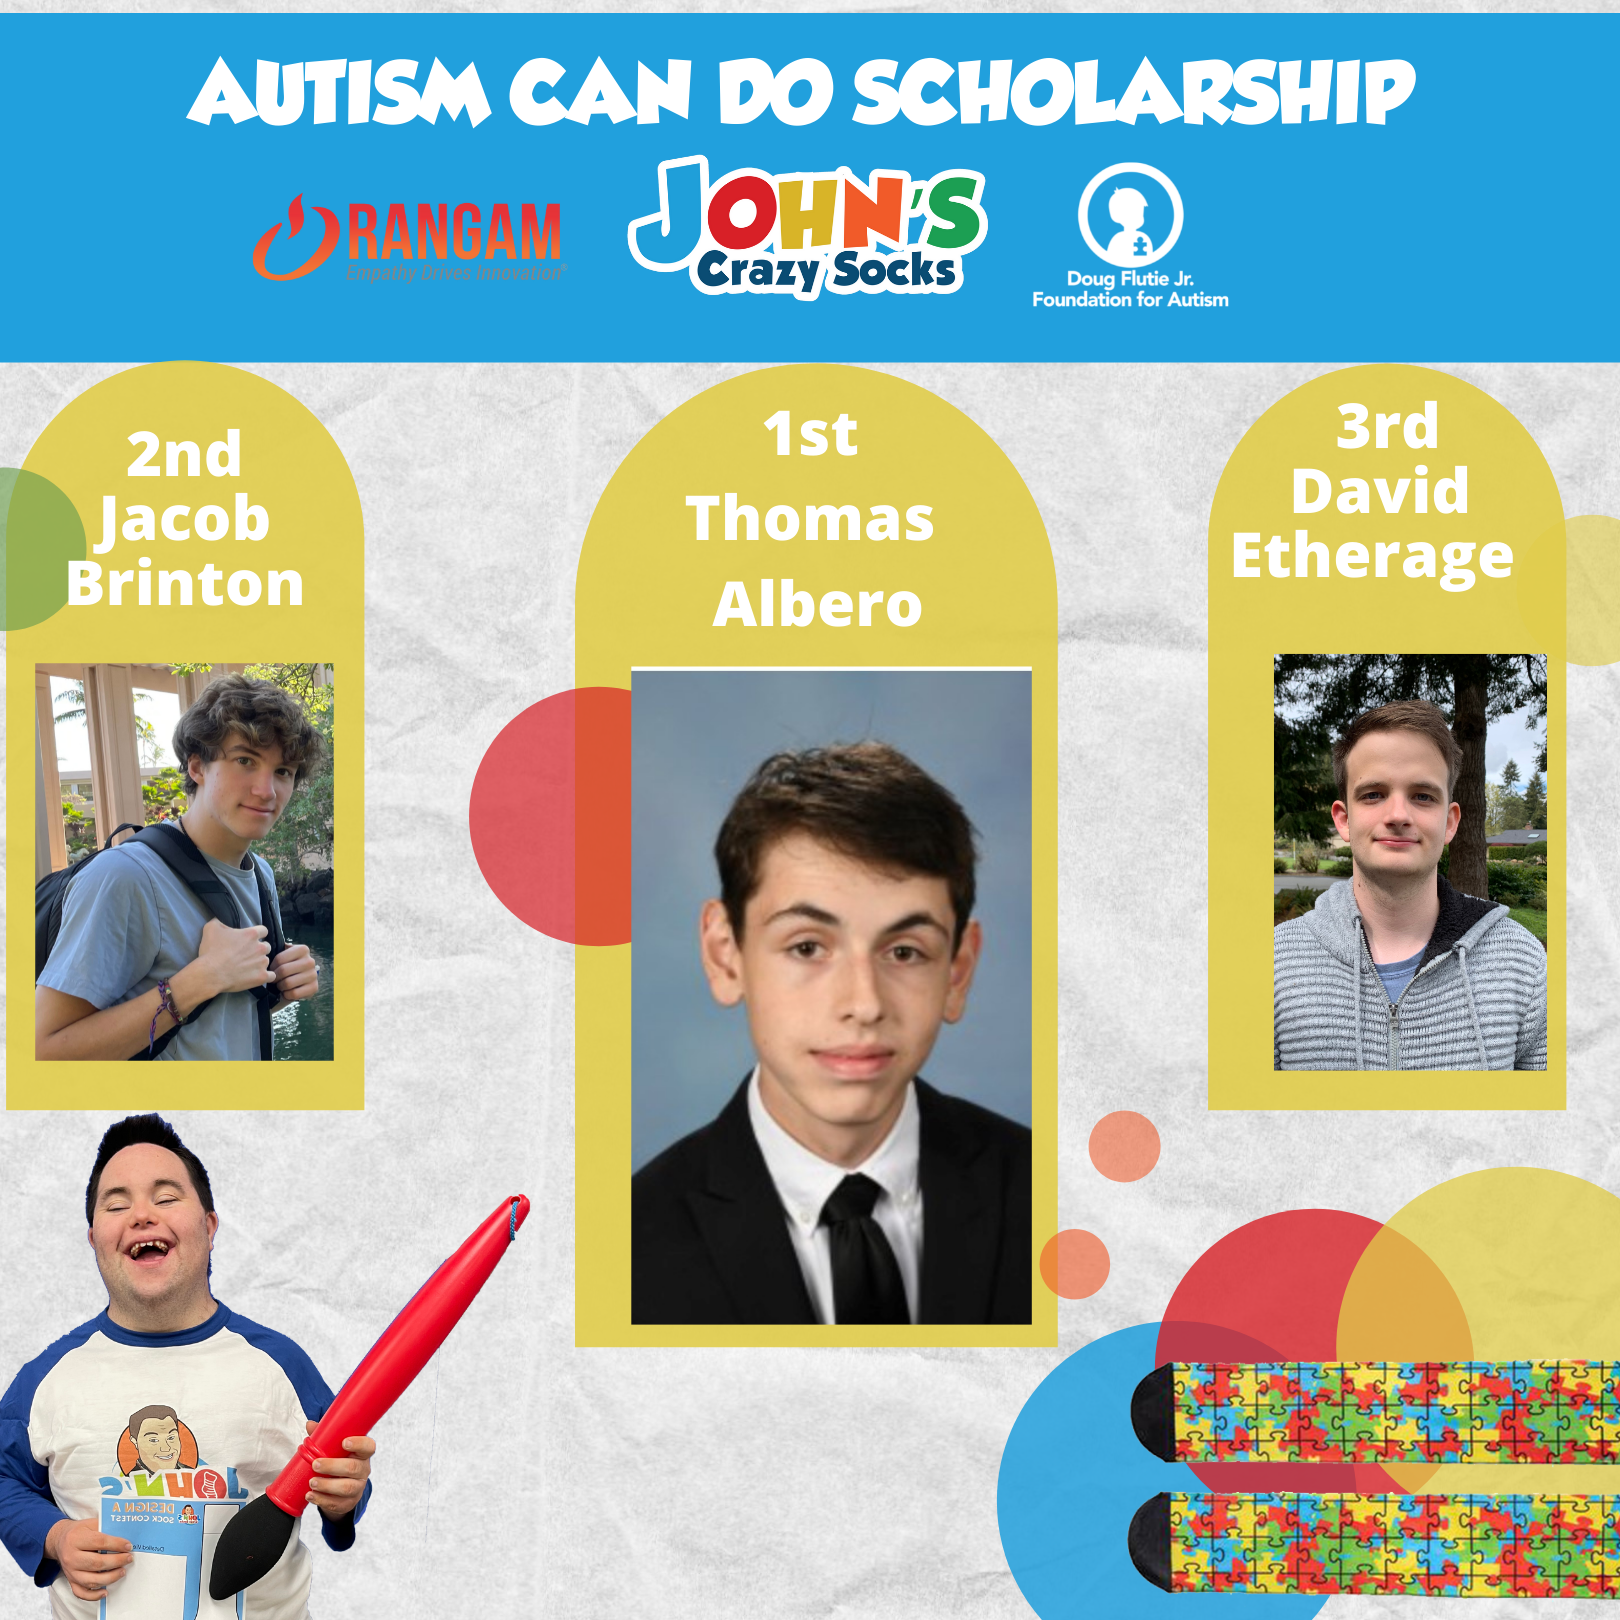 John’s Crazy Socks Announces the Winners of the Fourth Annual “Autism Can Do” Scholarship